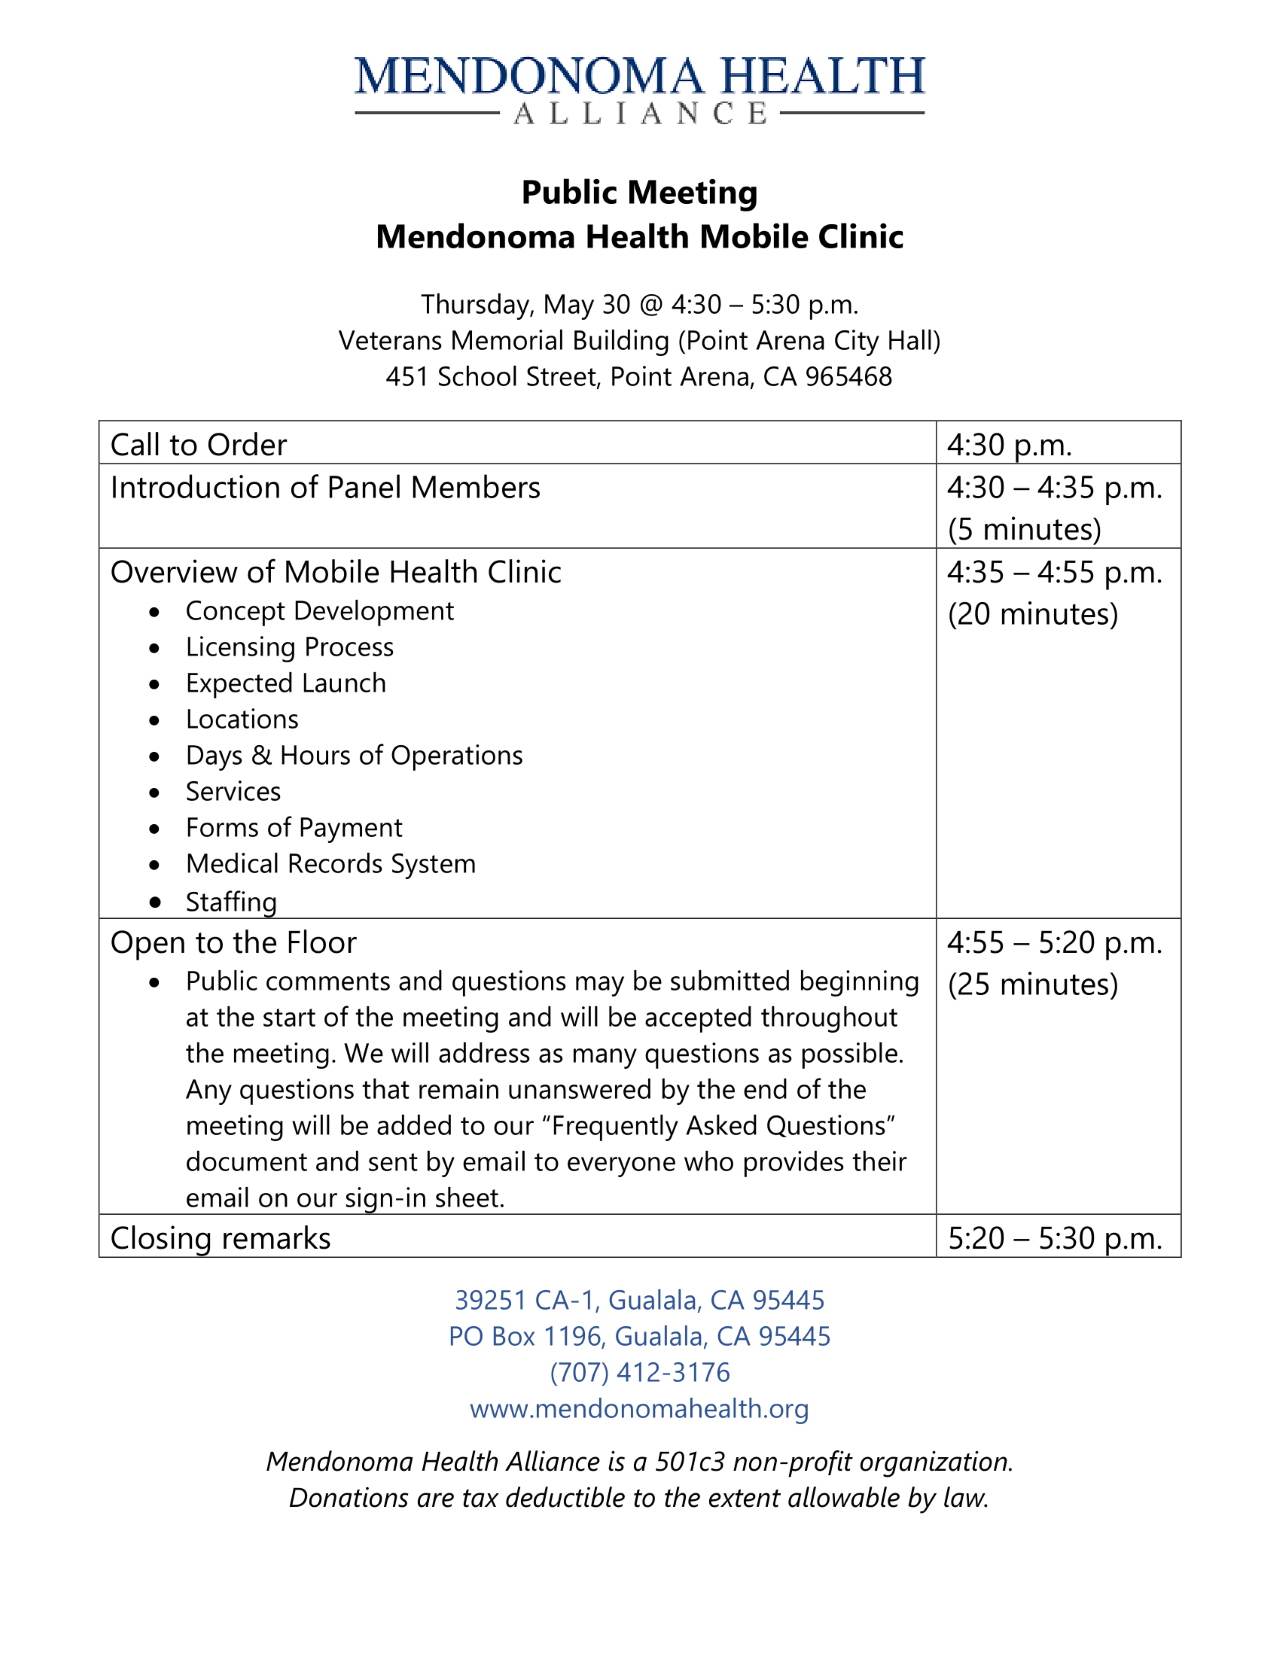 MHA letterhead agenda for upcoming Public Mobile Health Clinic meeting in Point Arena